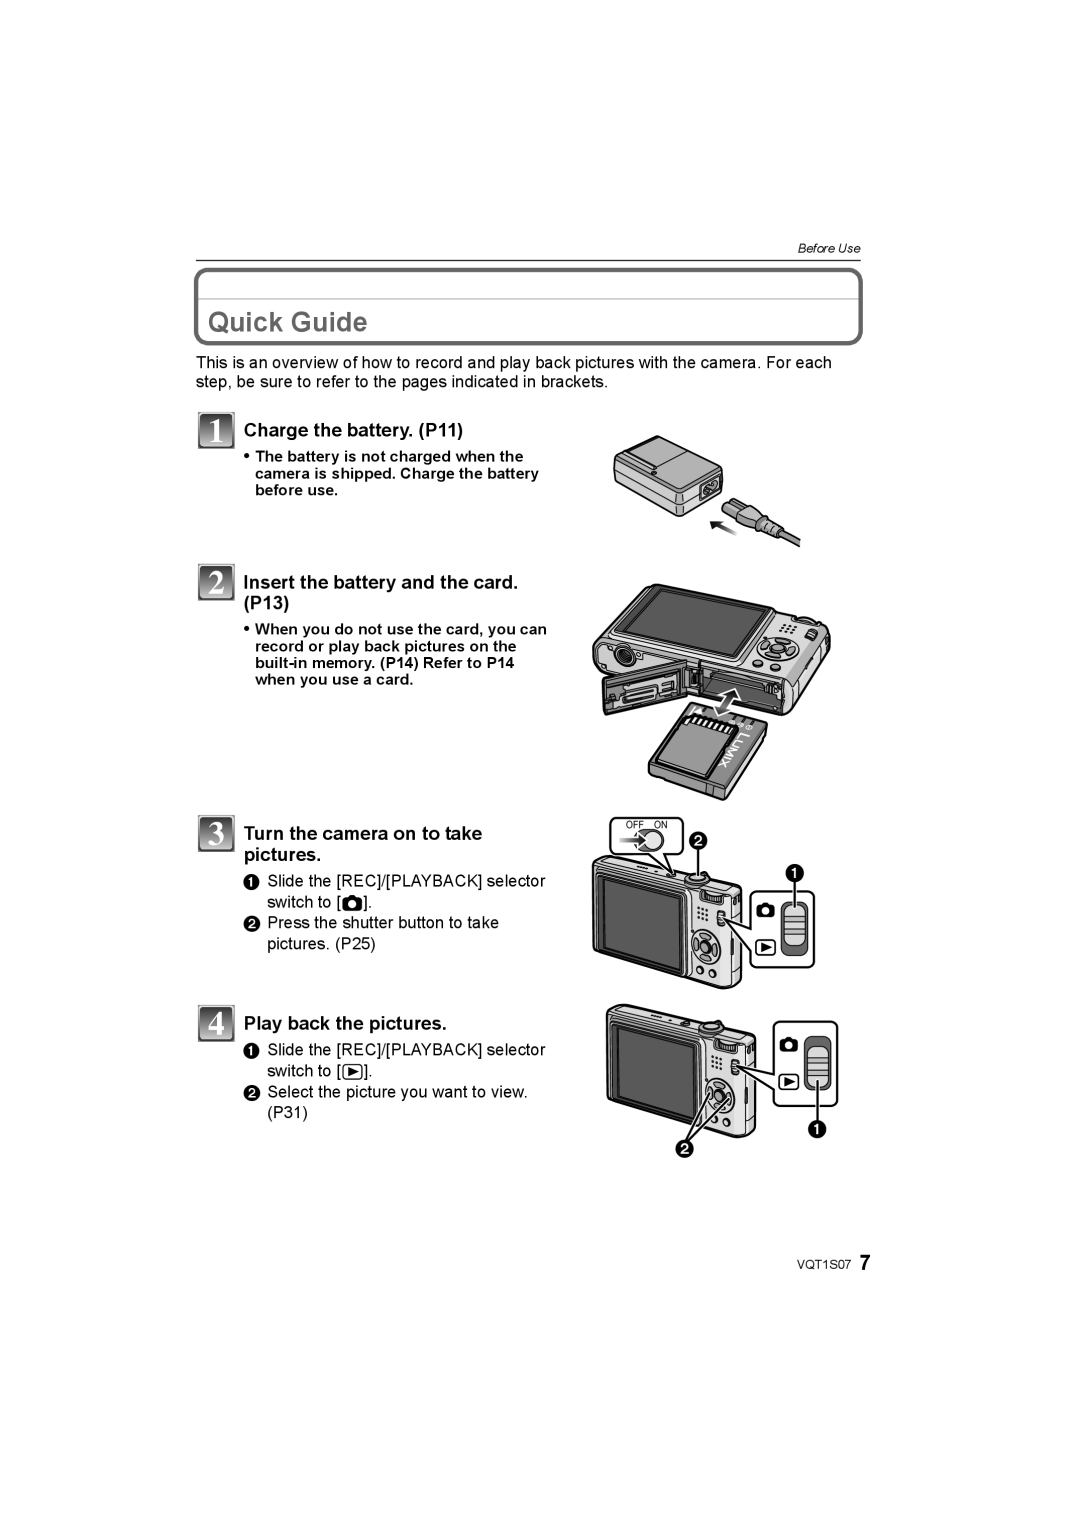 Panasonic DMC-FX38 Quick Guide, Charge the battery. P11, Insert the battery and the card, Play back the pictures 